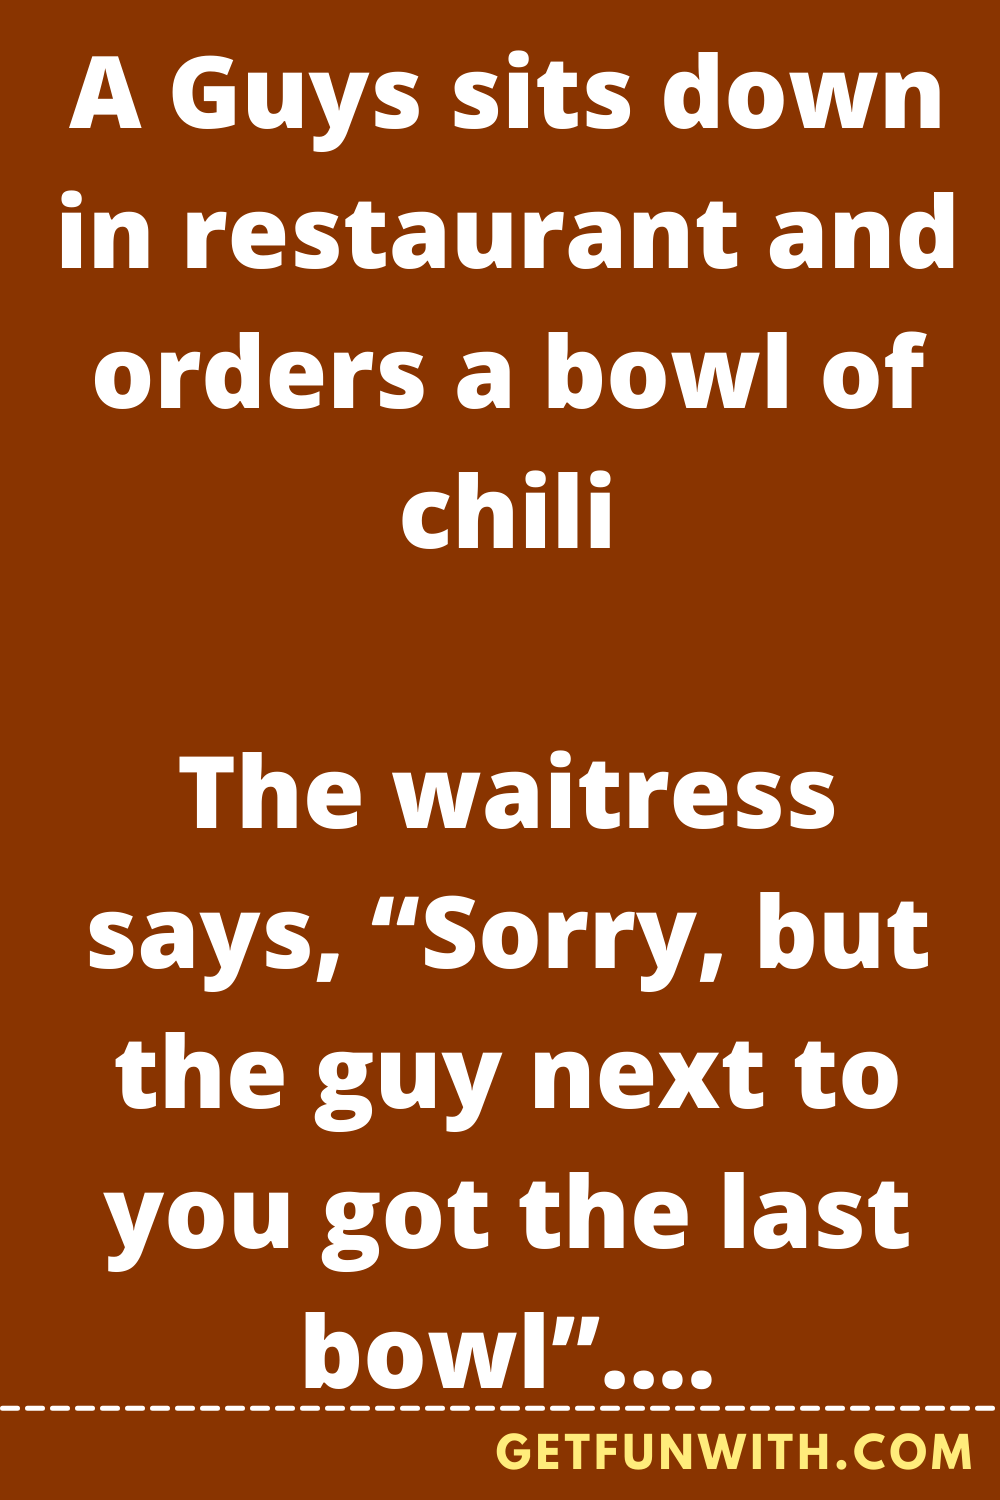 A Guys sits down in restaurant and orders a bowl of chili